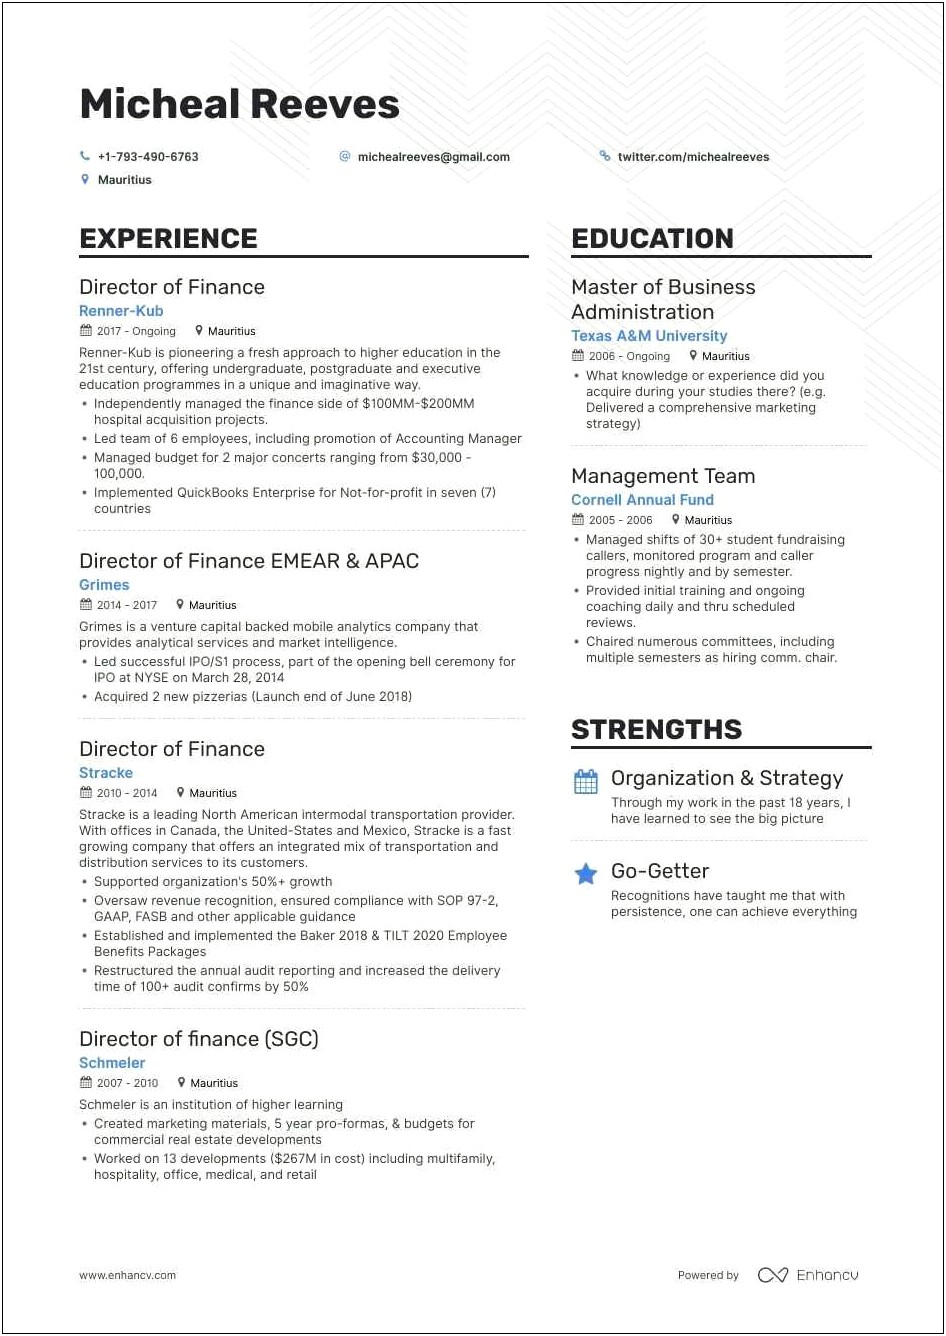 Resume Bullet About Managing Financial Books